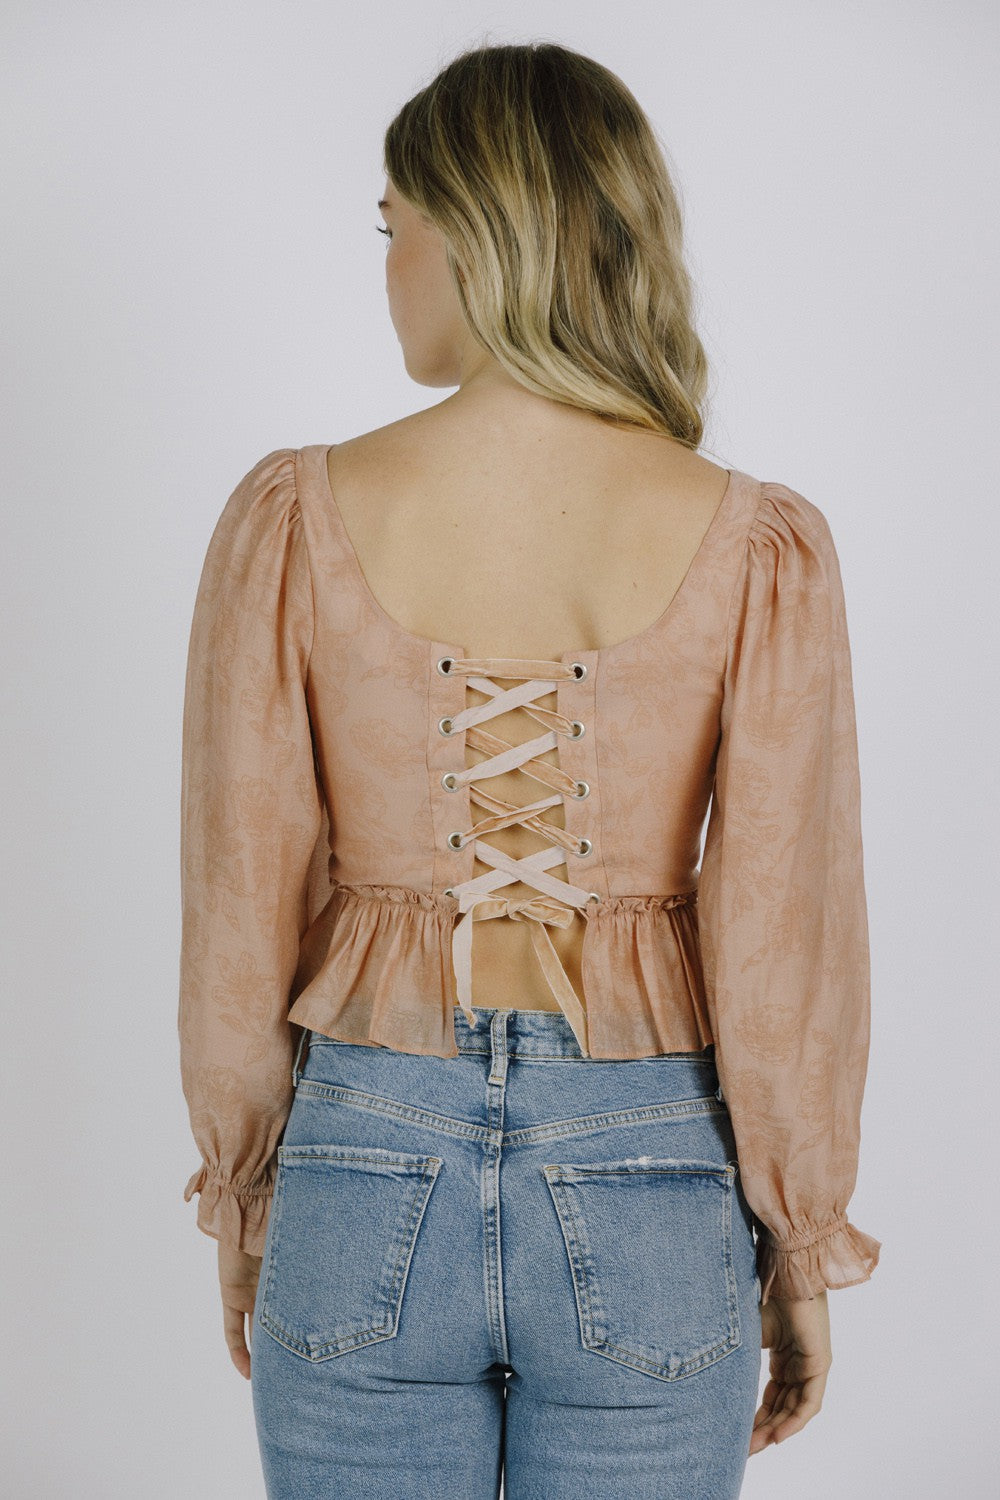 Storia | Rose Pink Long Sleeve Tied Back Top | Sweetest Stitch RVA